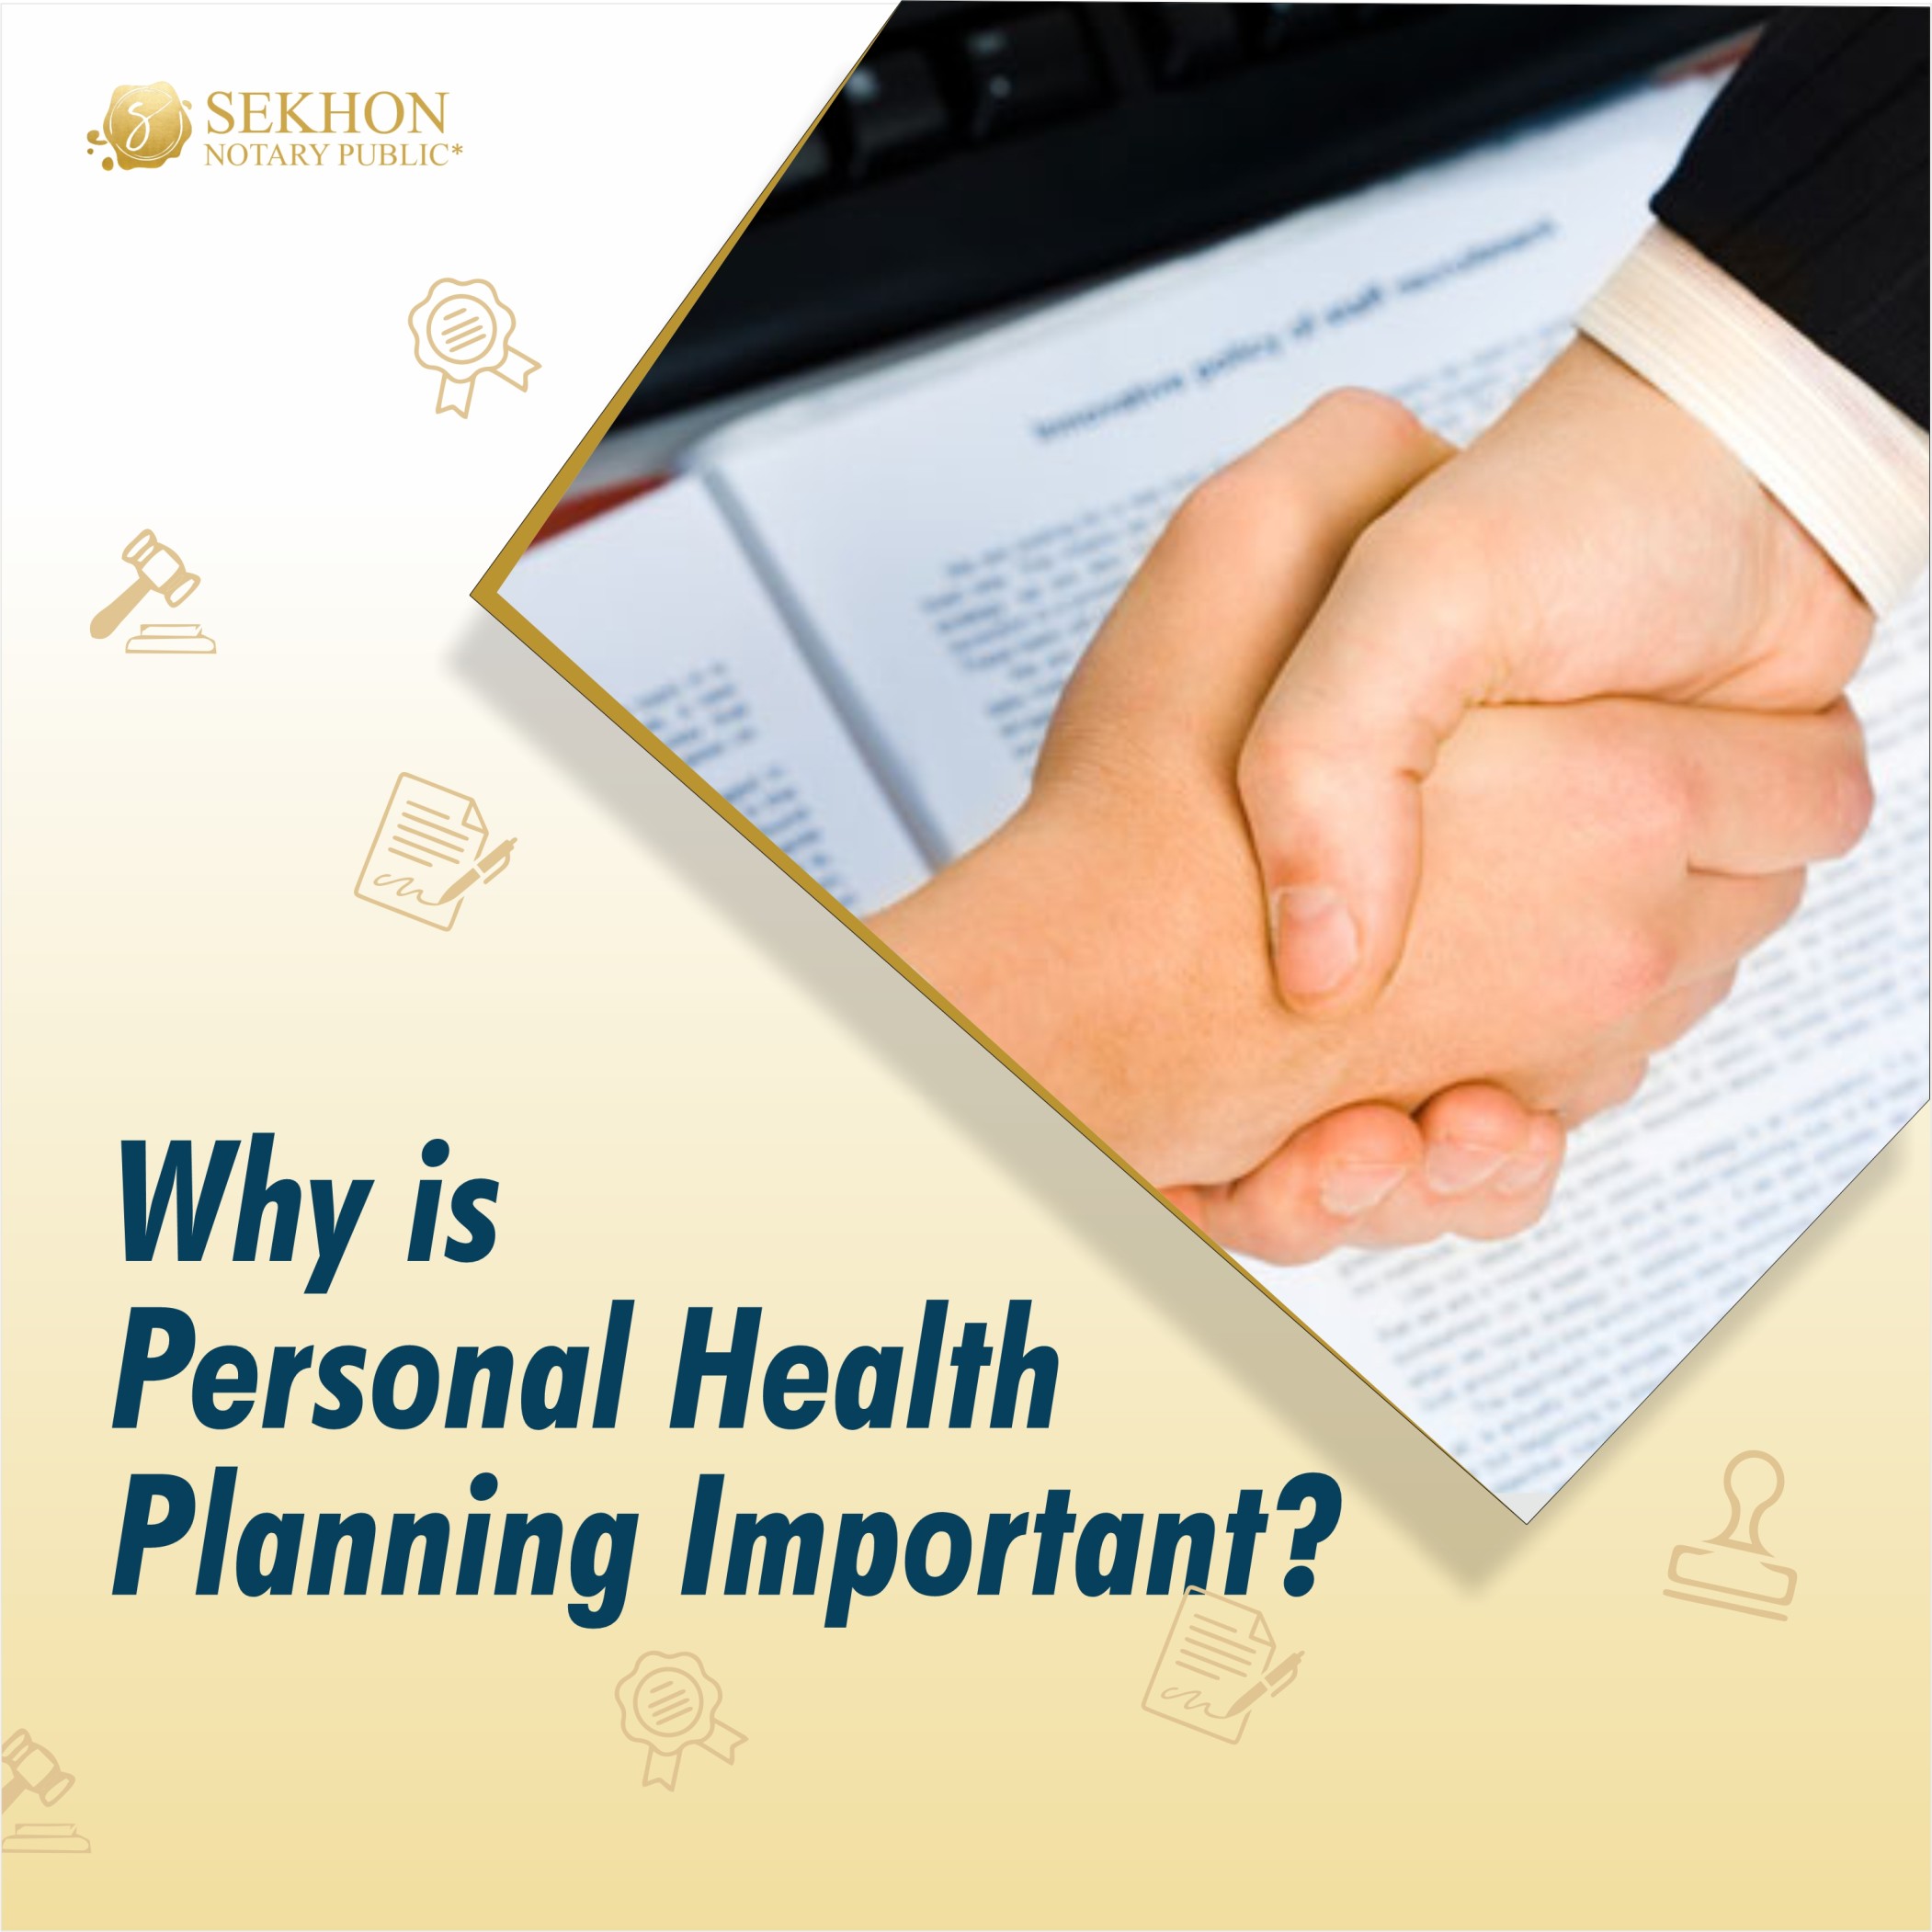 Why is Personal Health Planning Important